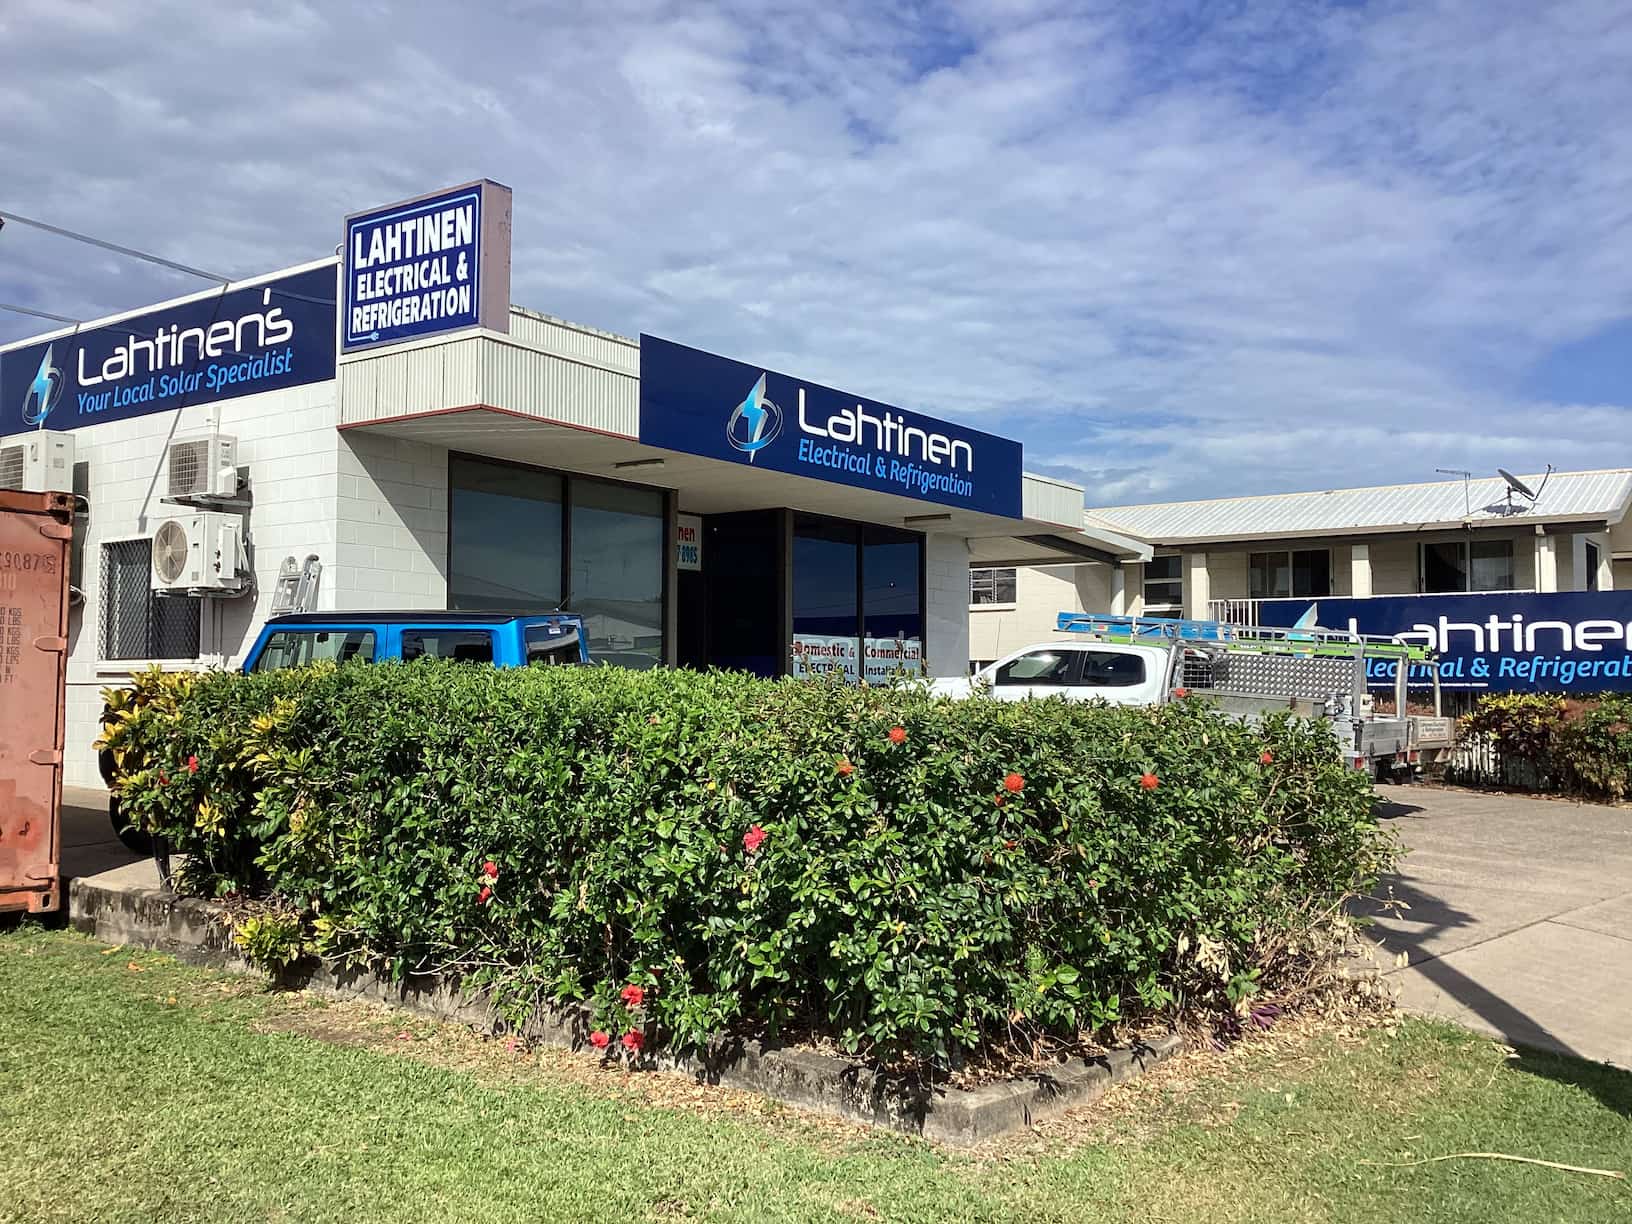 Company — Lahtinen Electrical And Refrigeration in Ingham, QLD